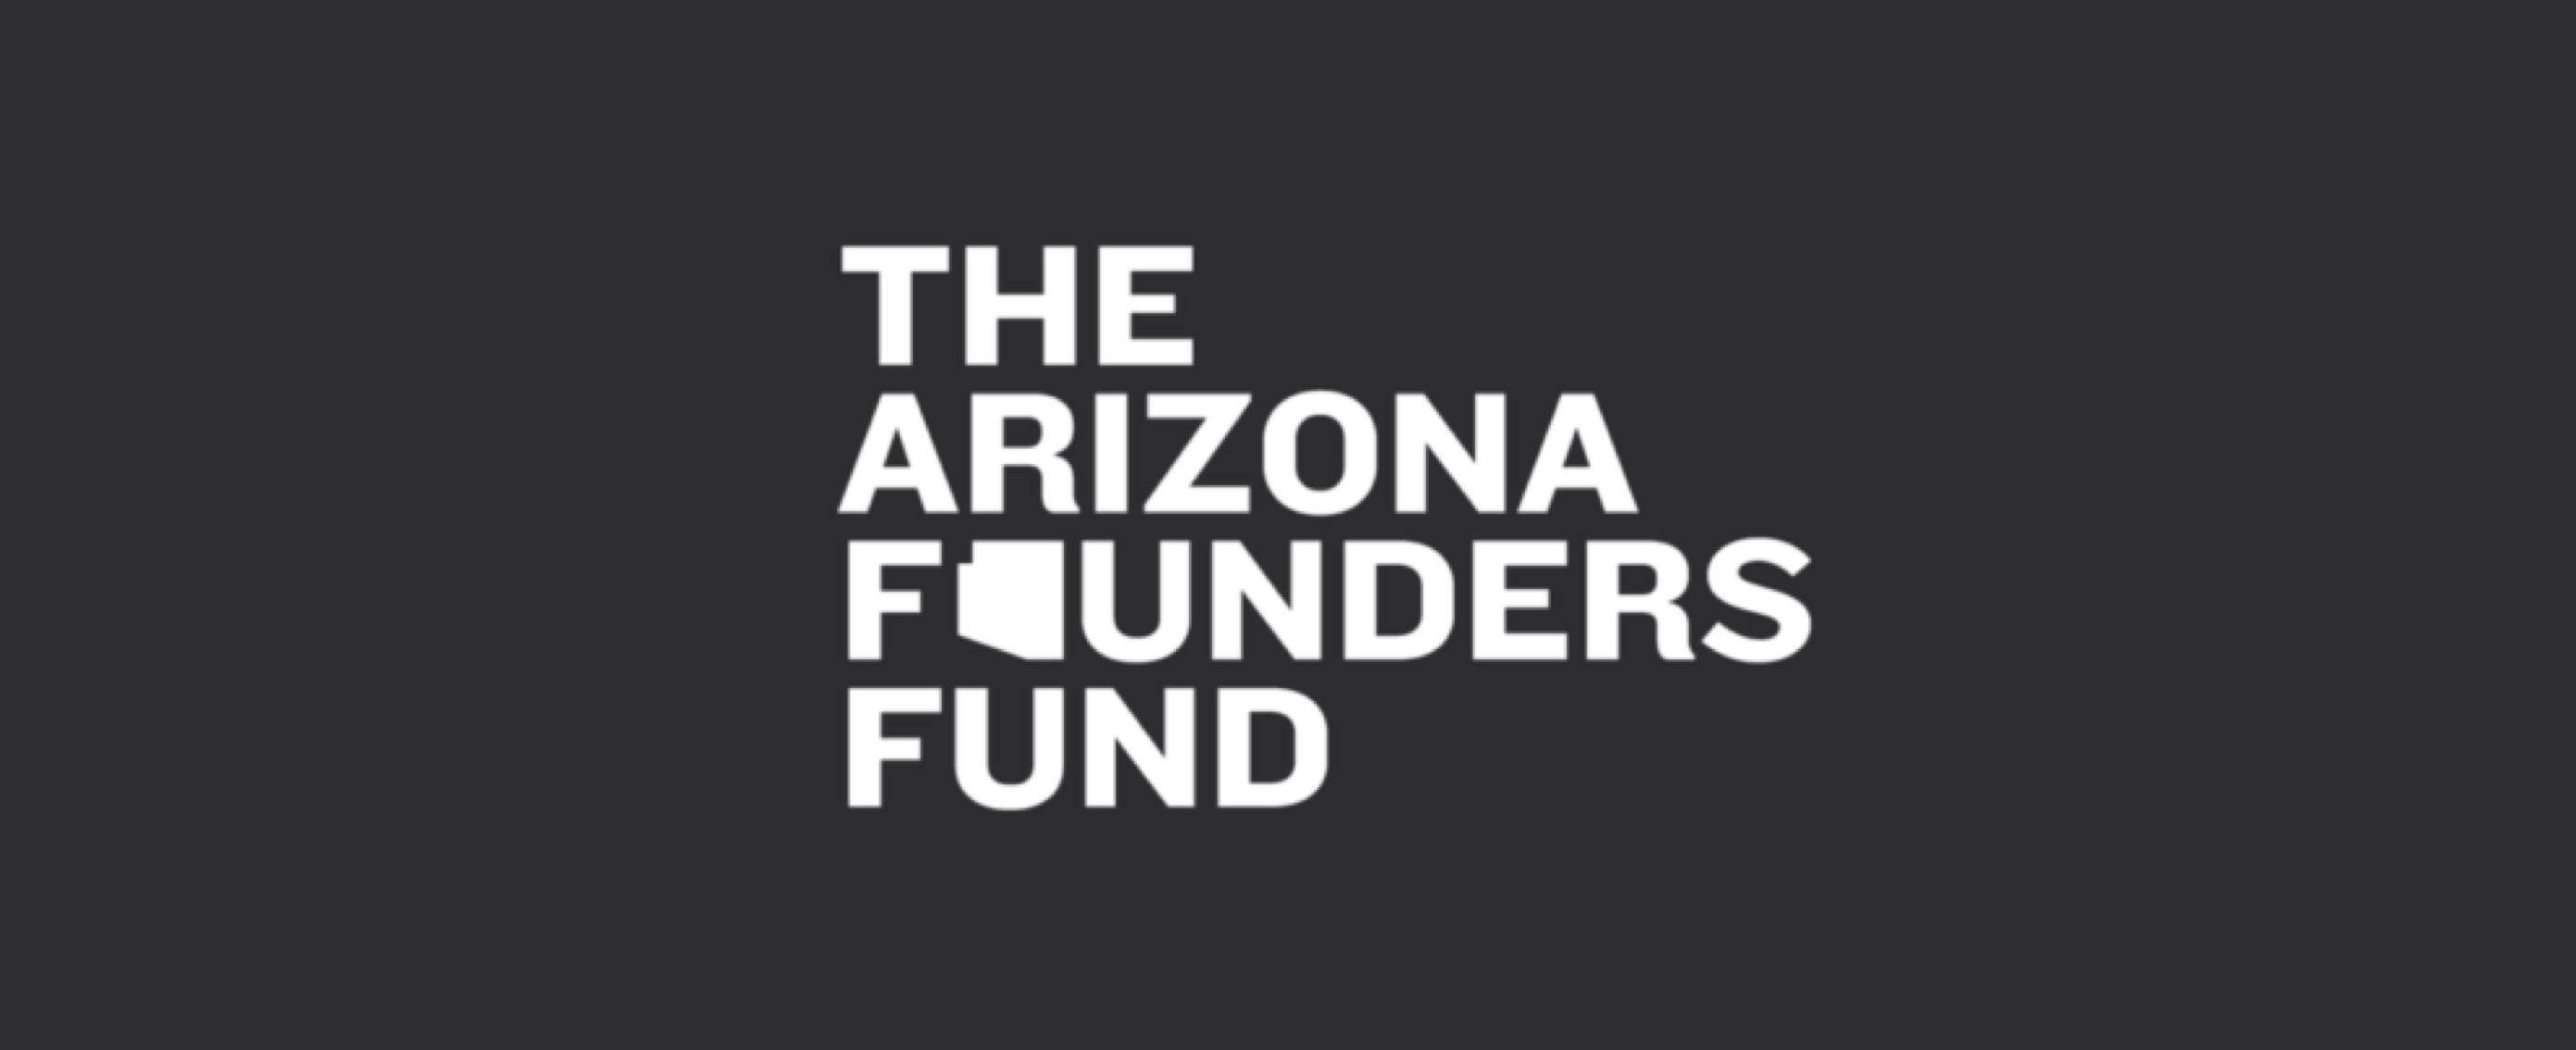 Why I invested in the Arizona Founders Fund